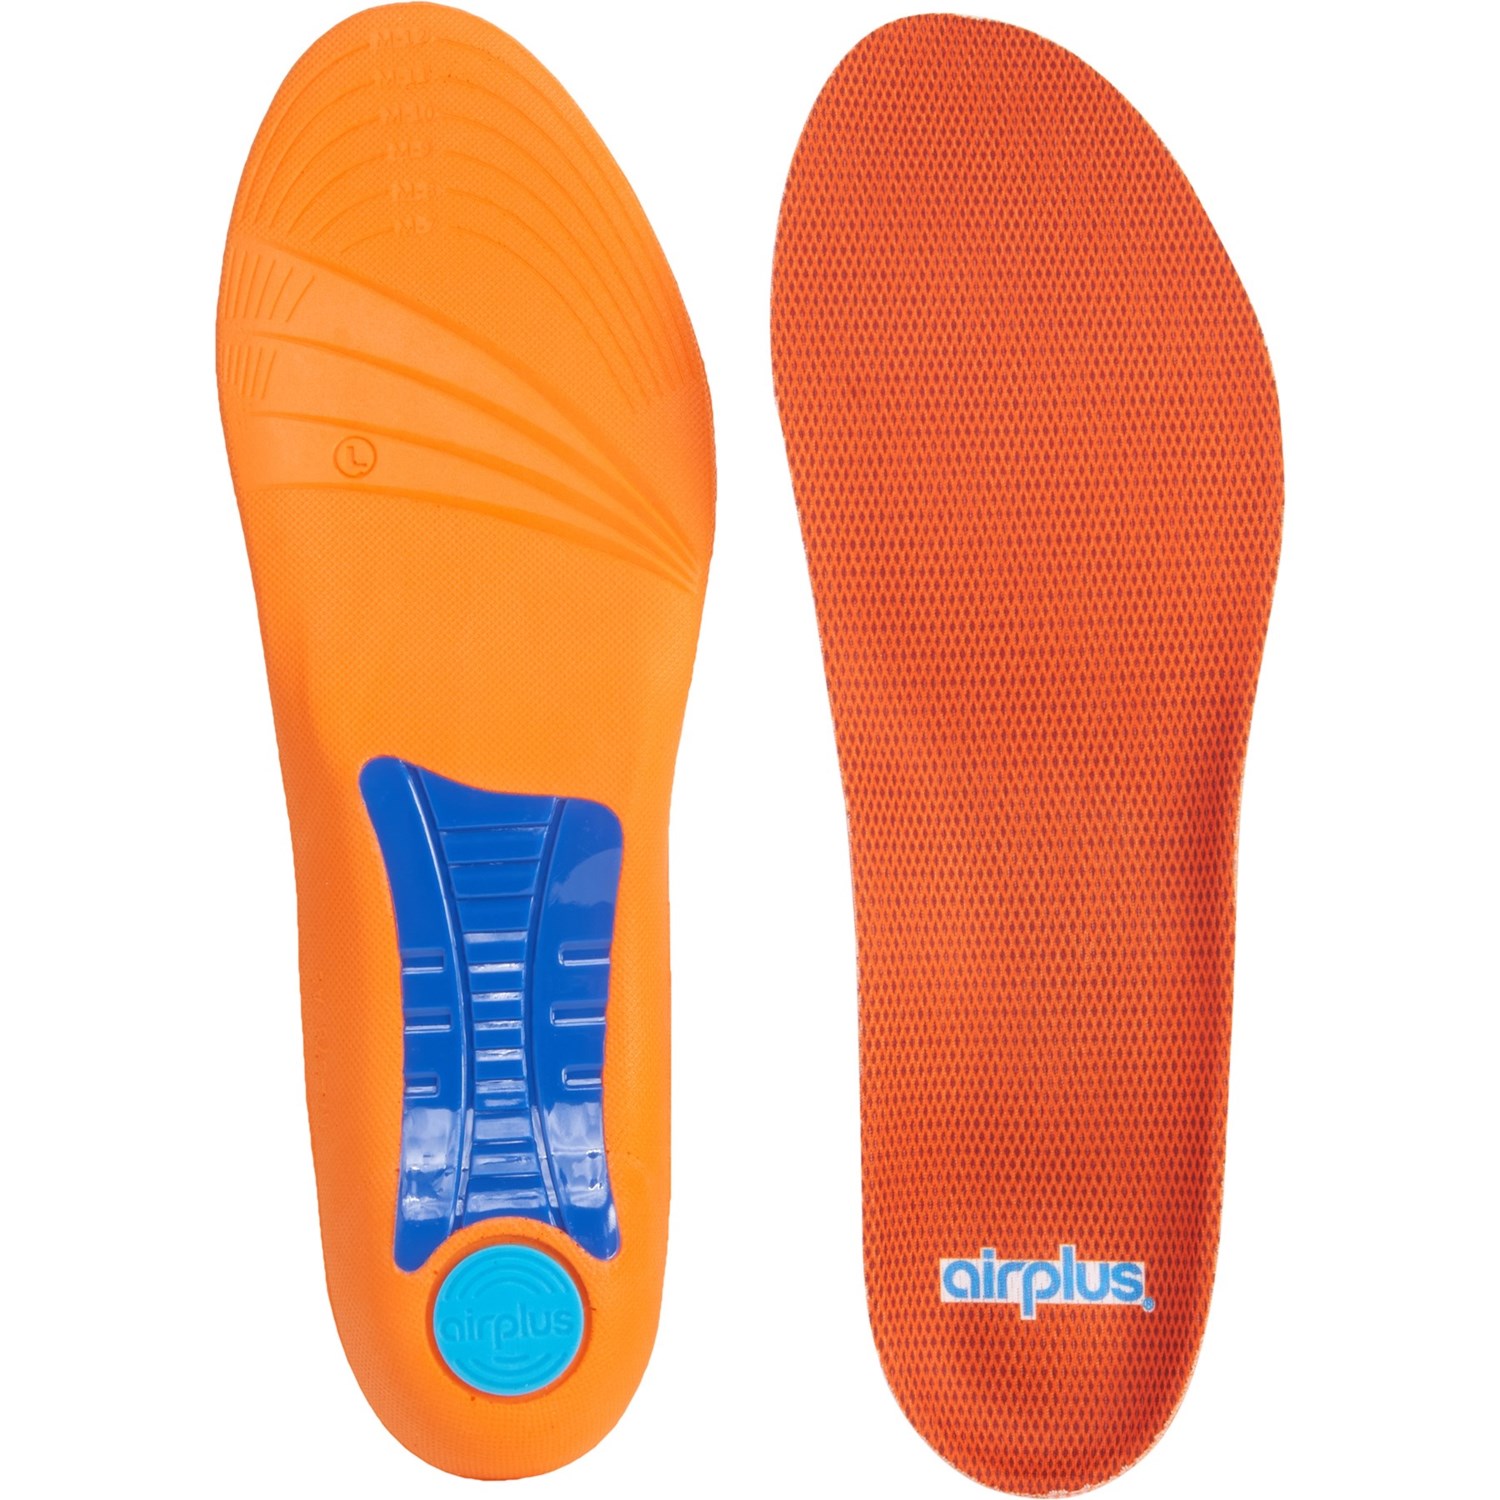 airplus insoles